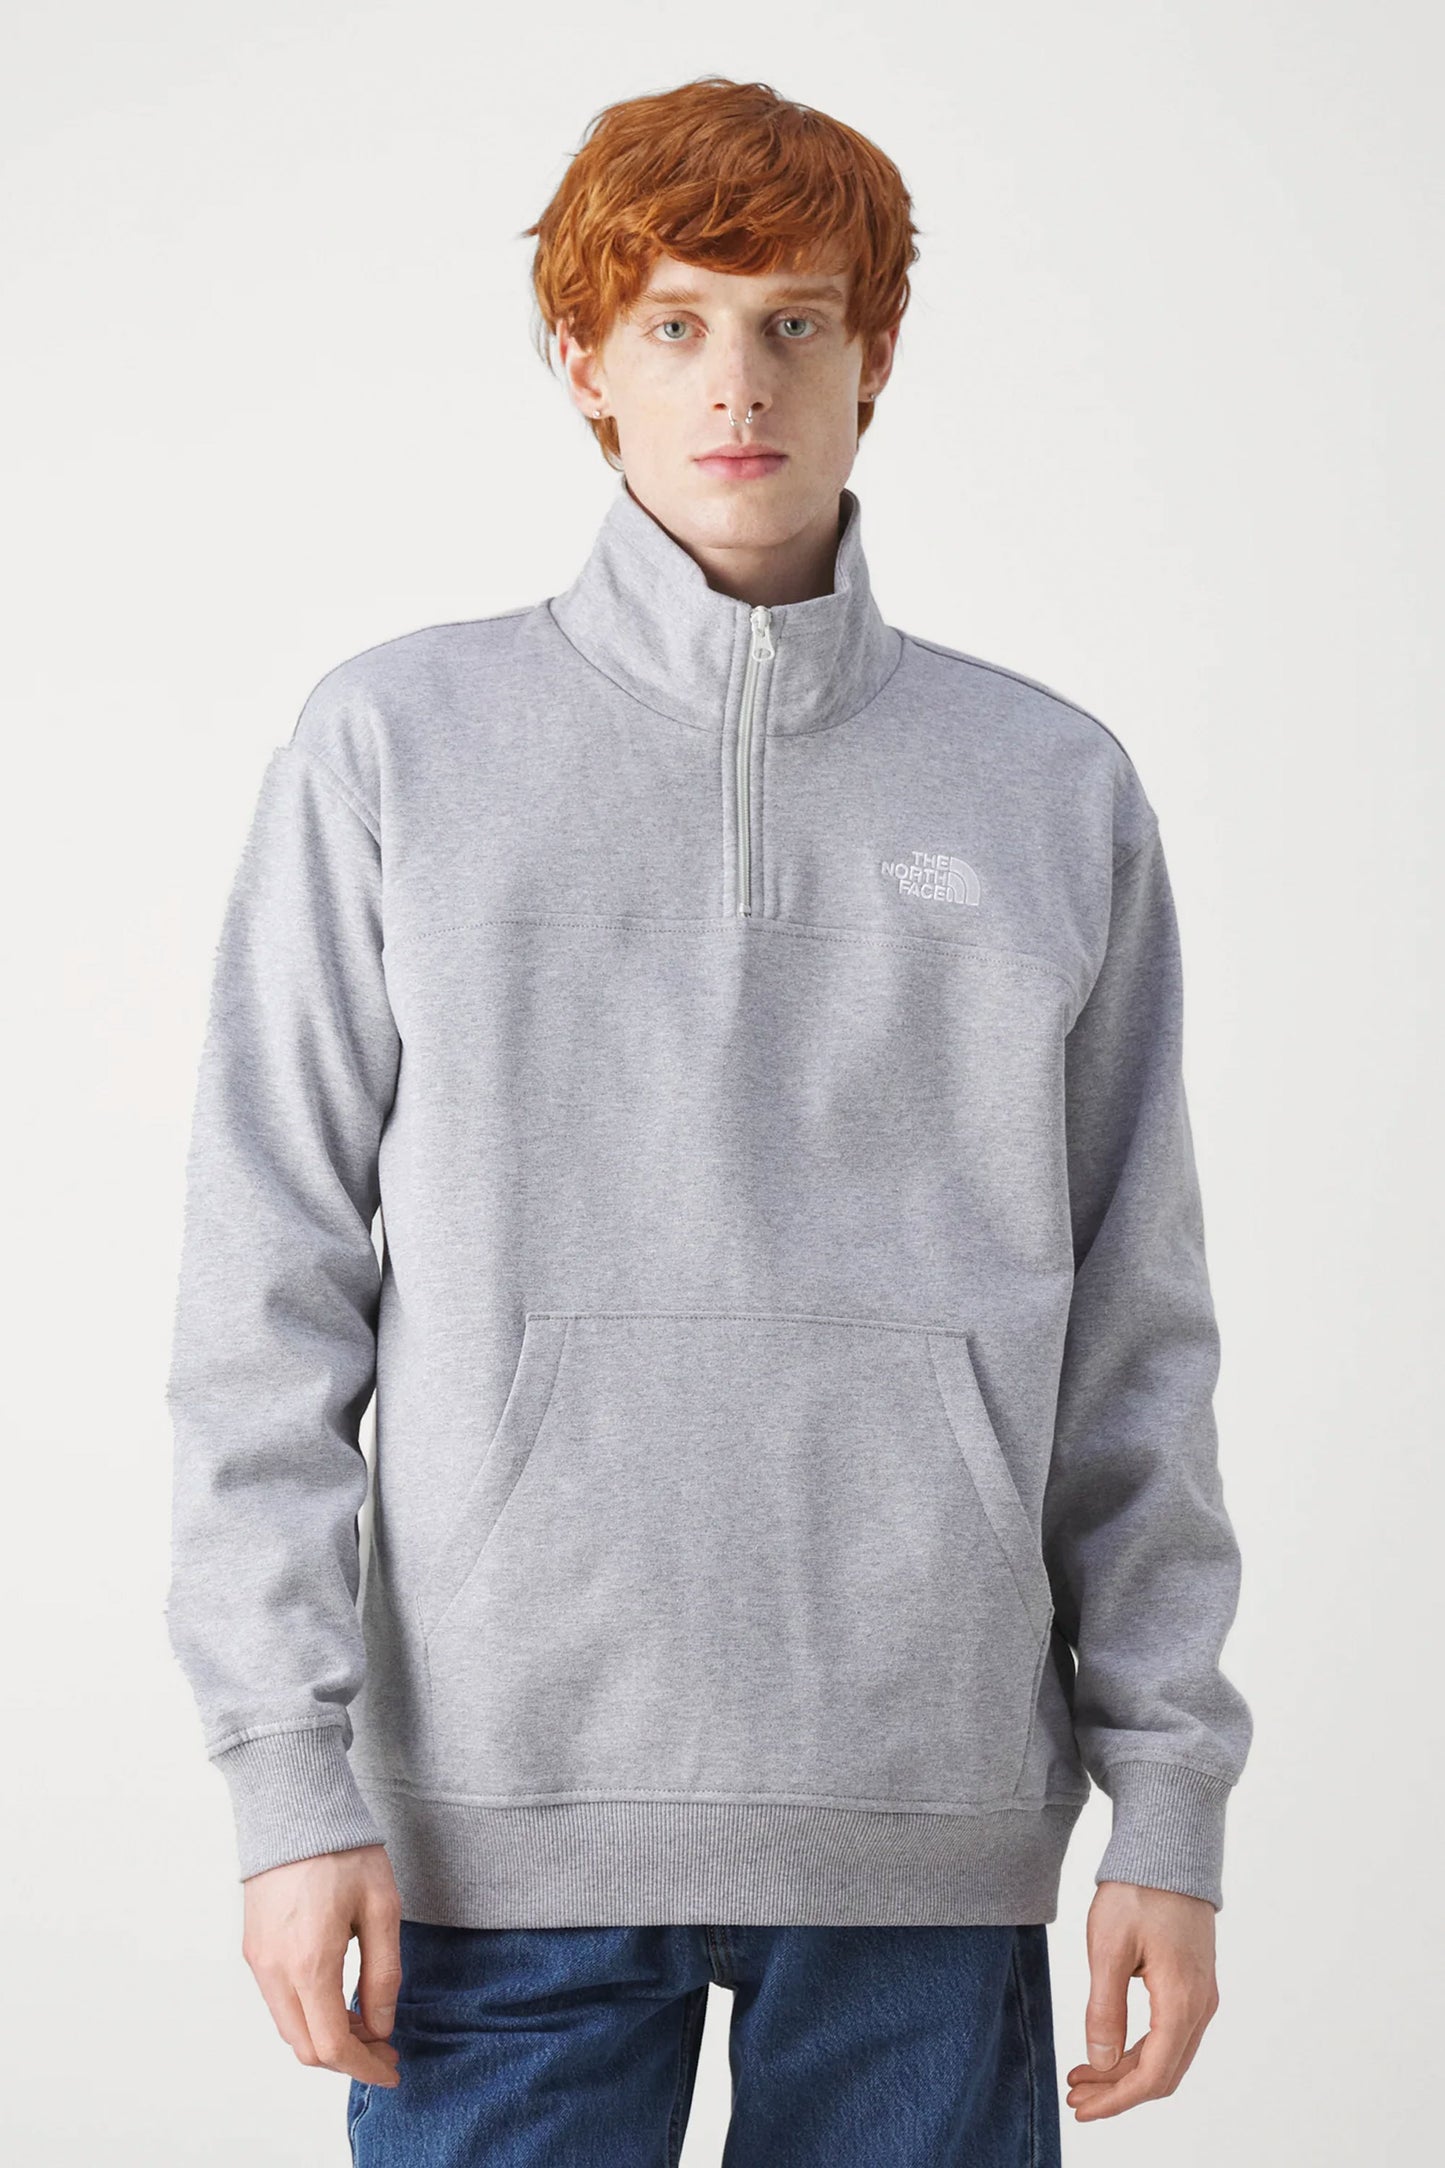 Pukas-Surf-Shop-the-north-face-hoodie-man-essential-crew-light-grey